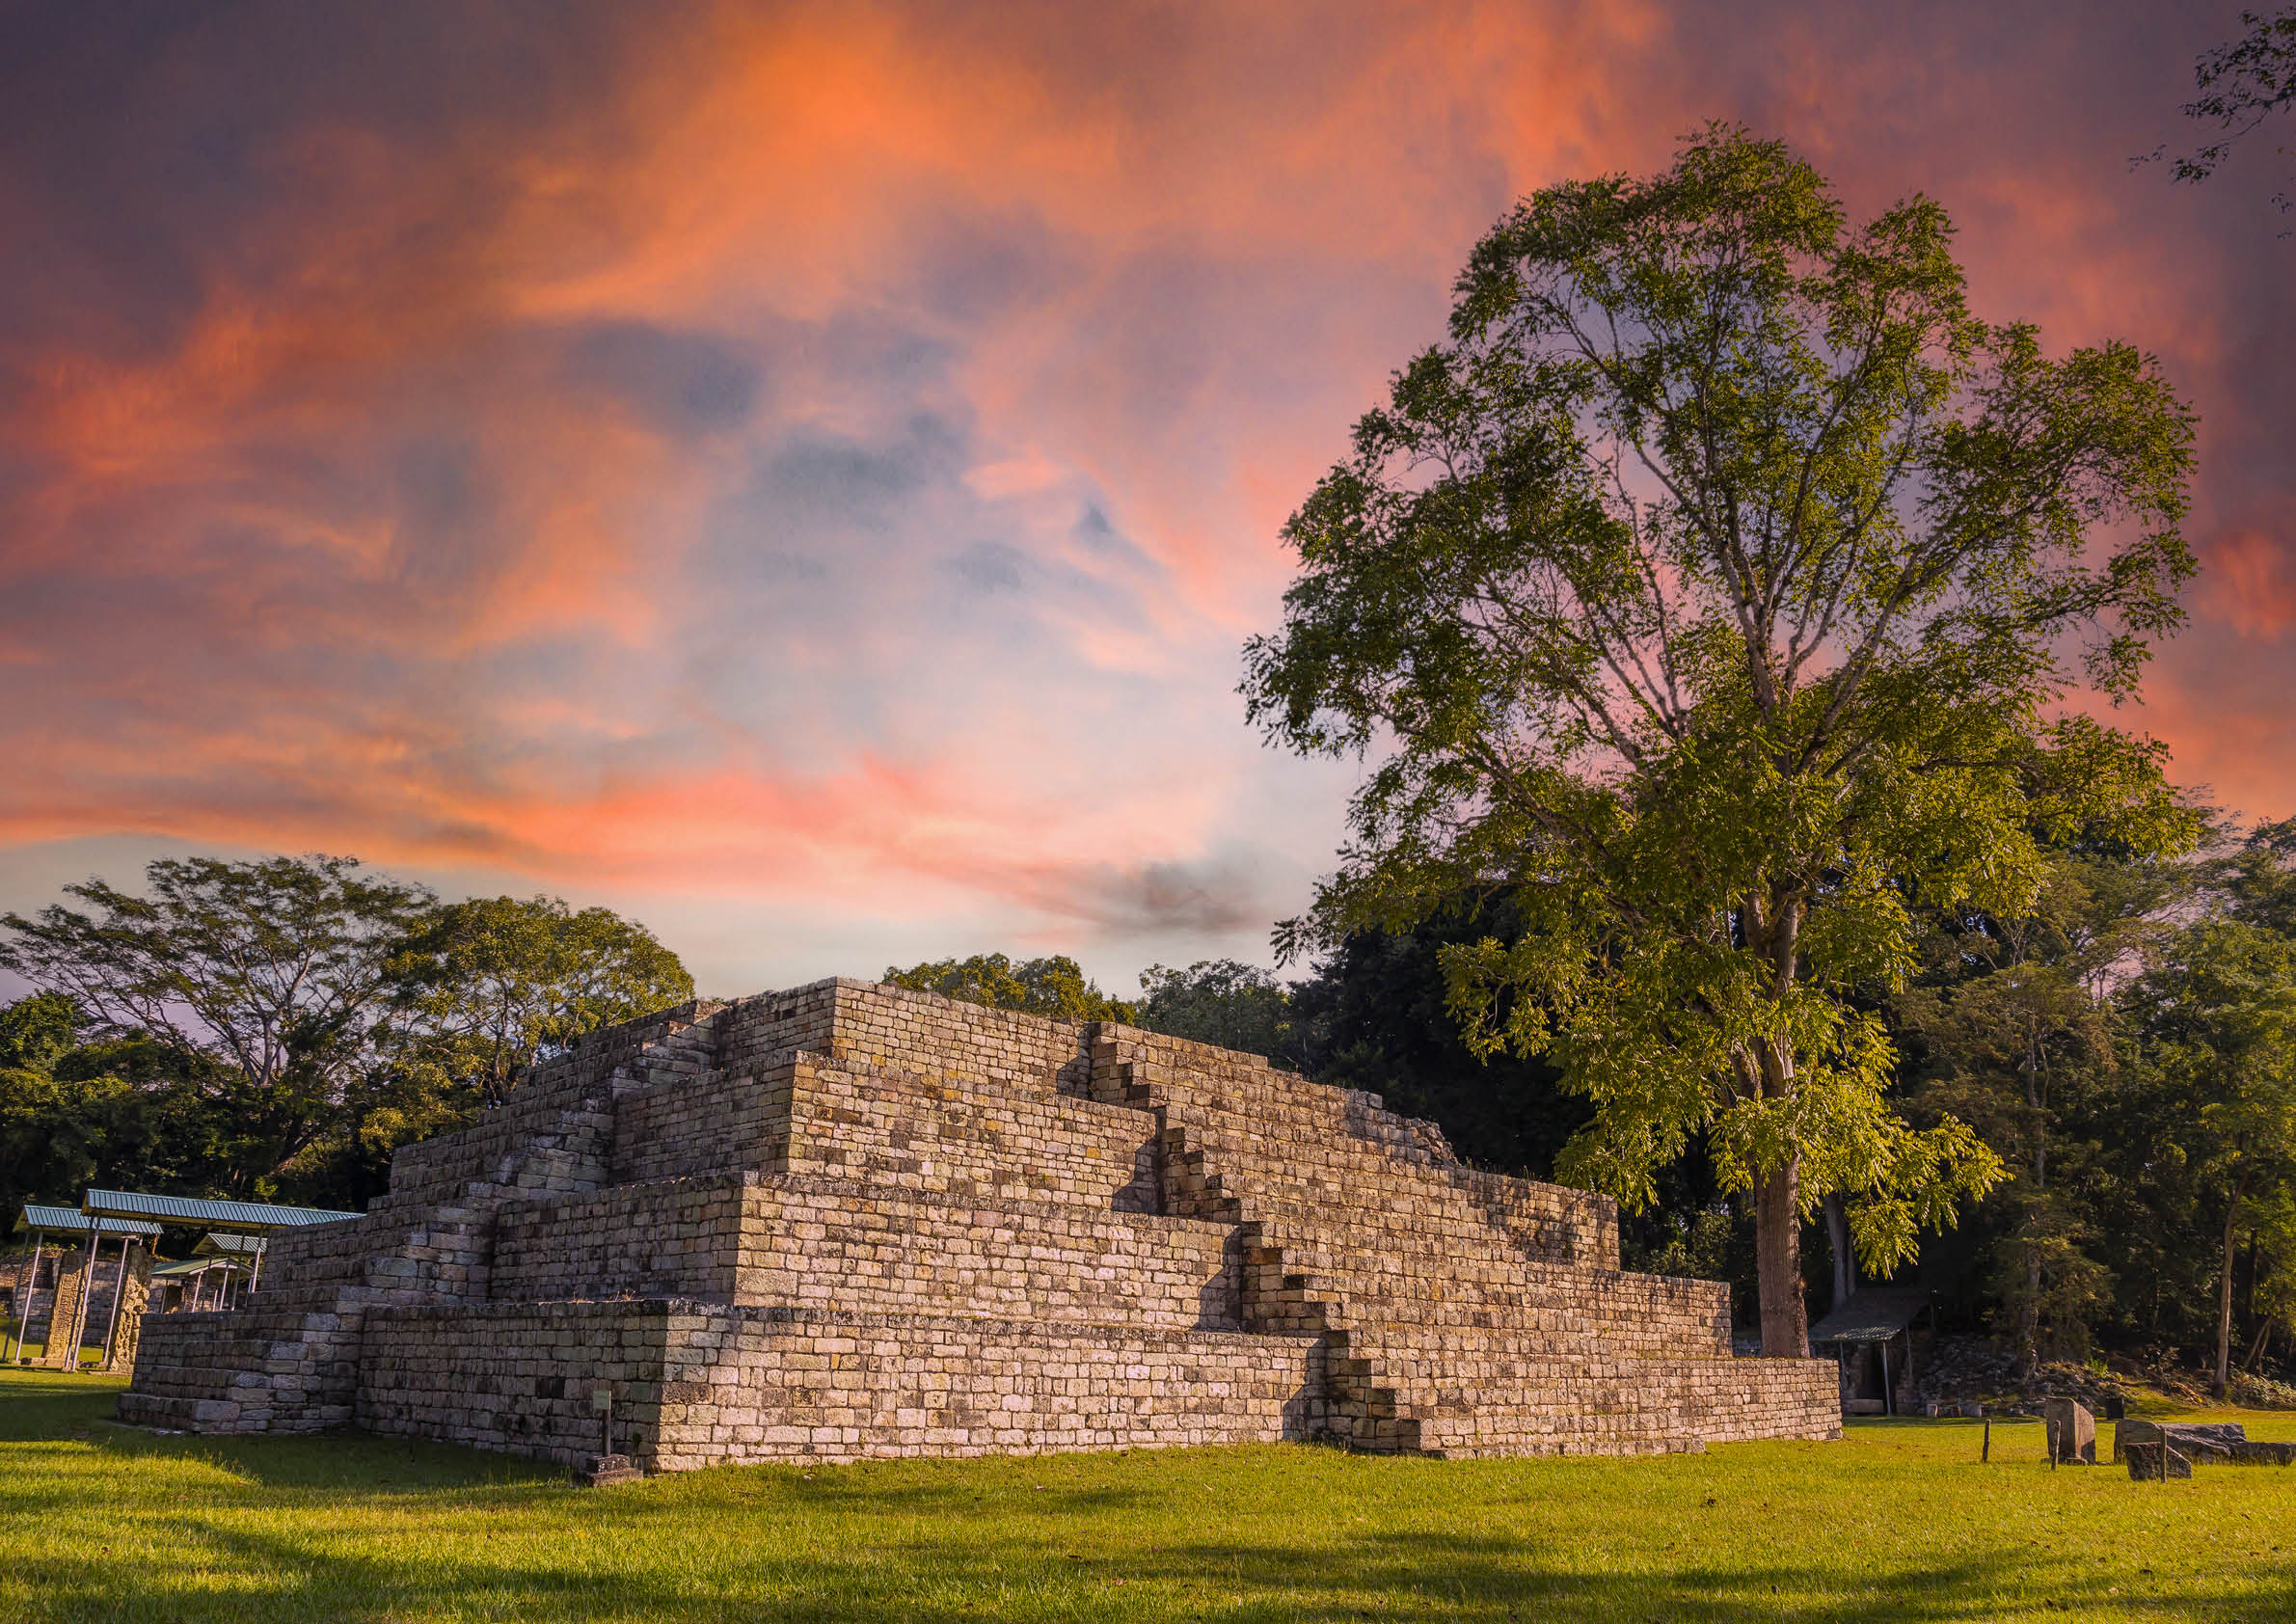 A Mayan pyramid next to a tree at the Copán Ruinas temples in a beautiful orange sunrise  Honduras